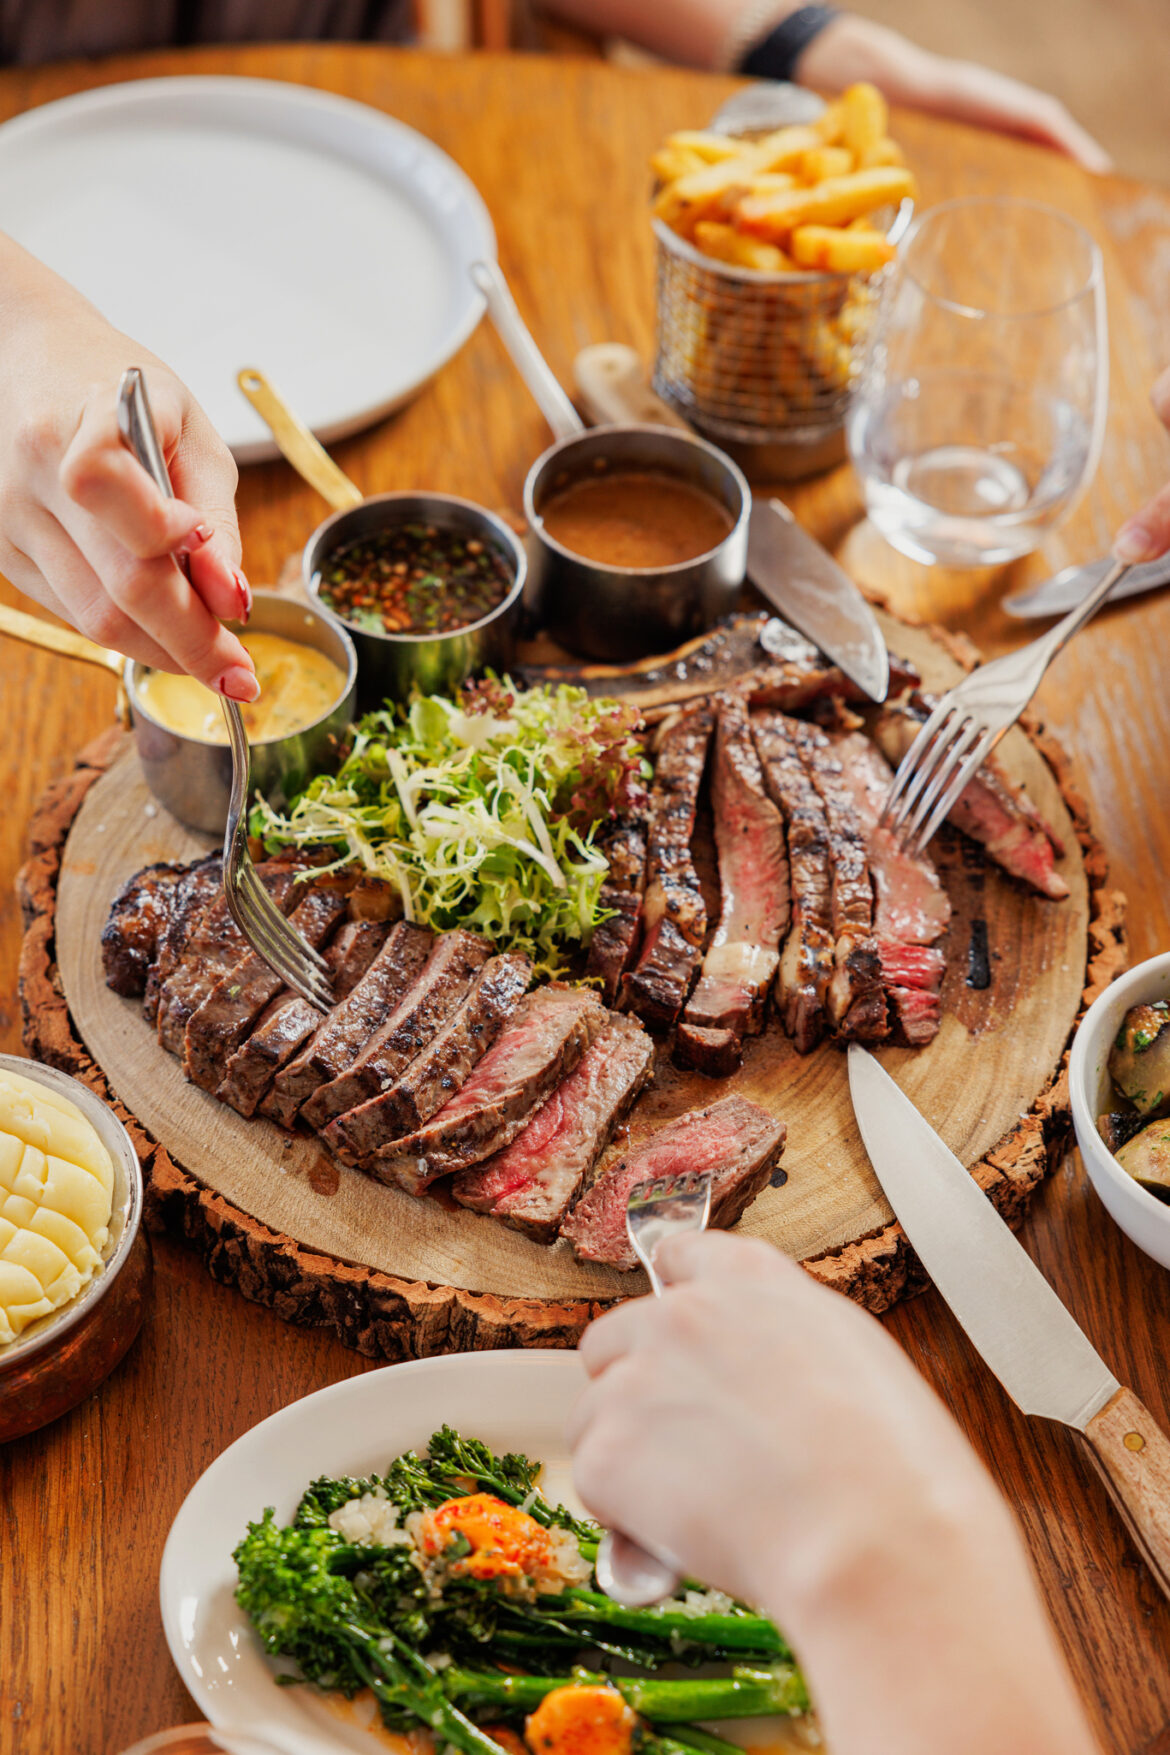 A photo of a steak on a wooden board being shared by three people. The steak is cooked medium rare and there are sides of mashed potato and broccoli.